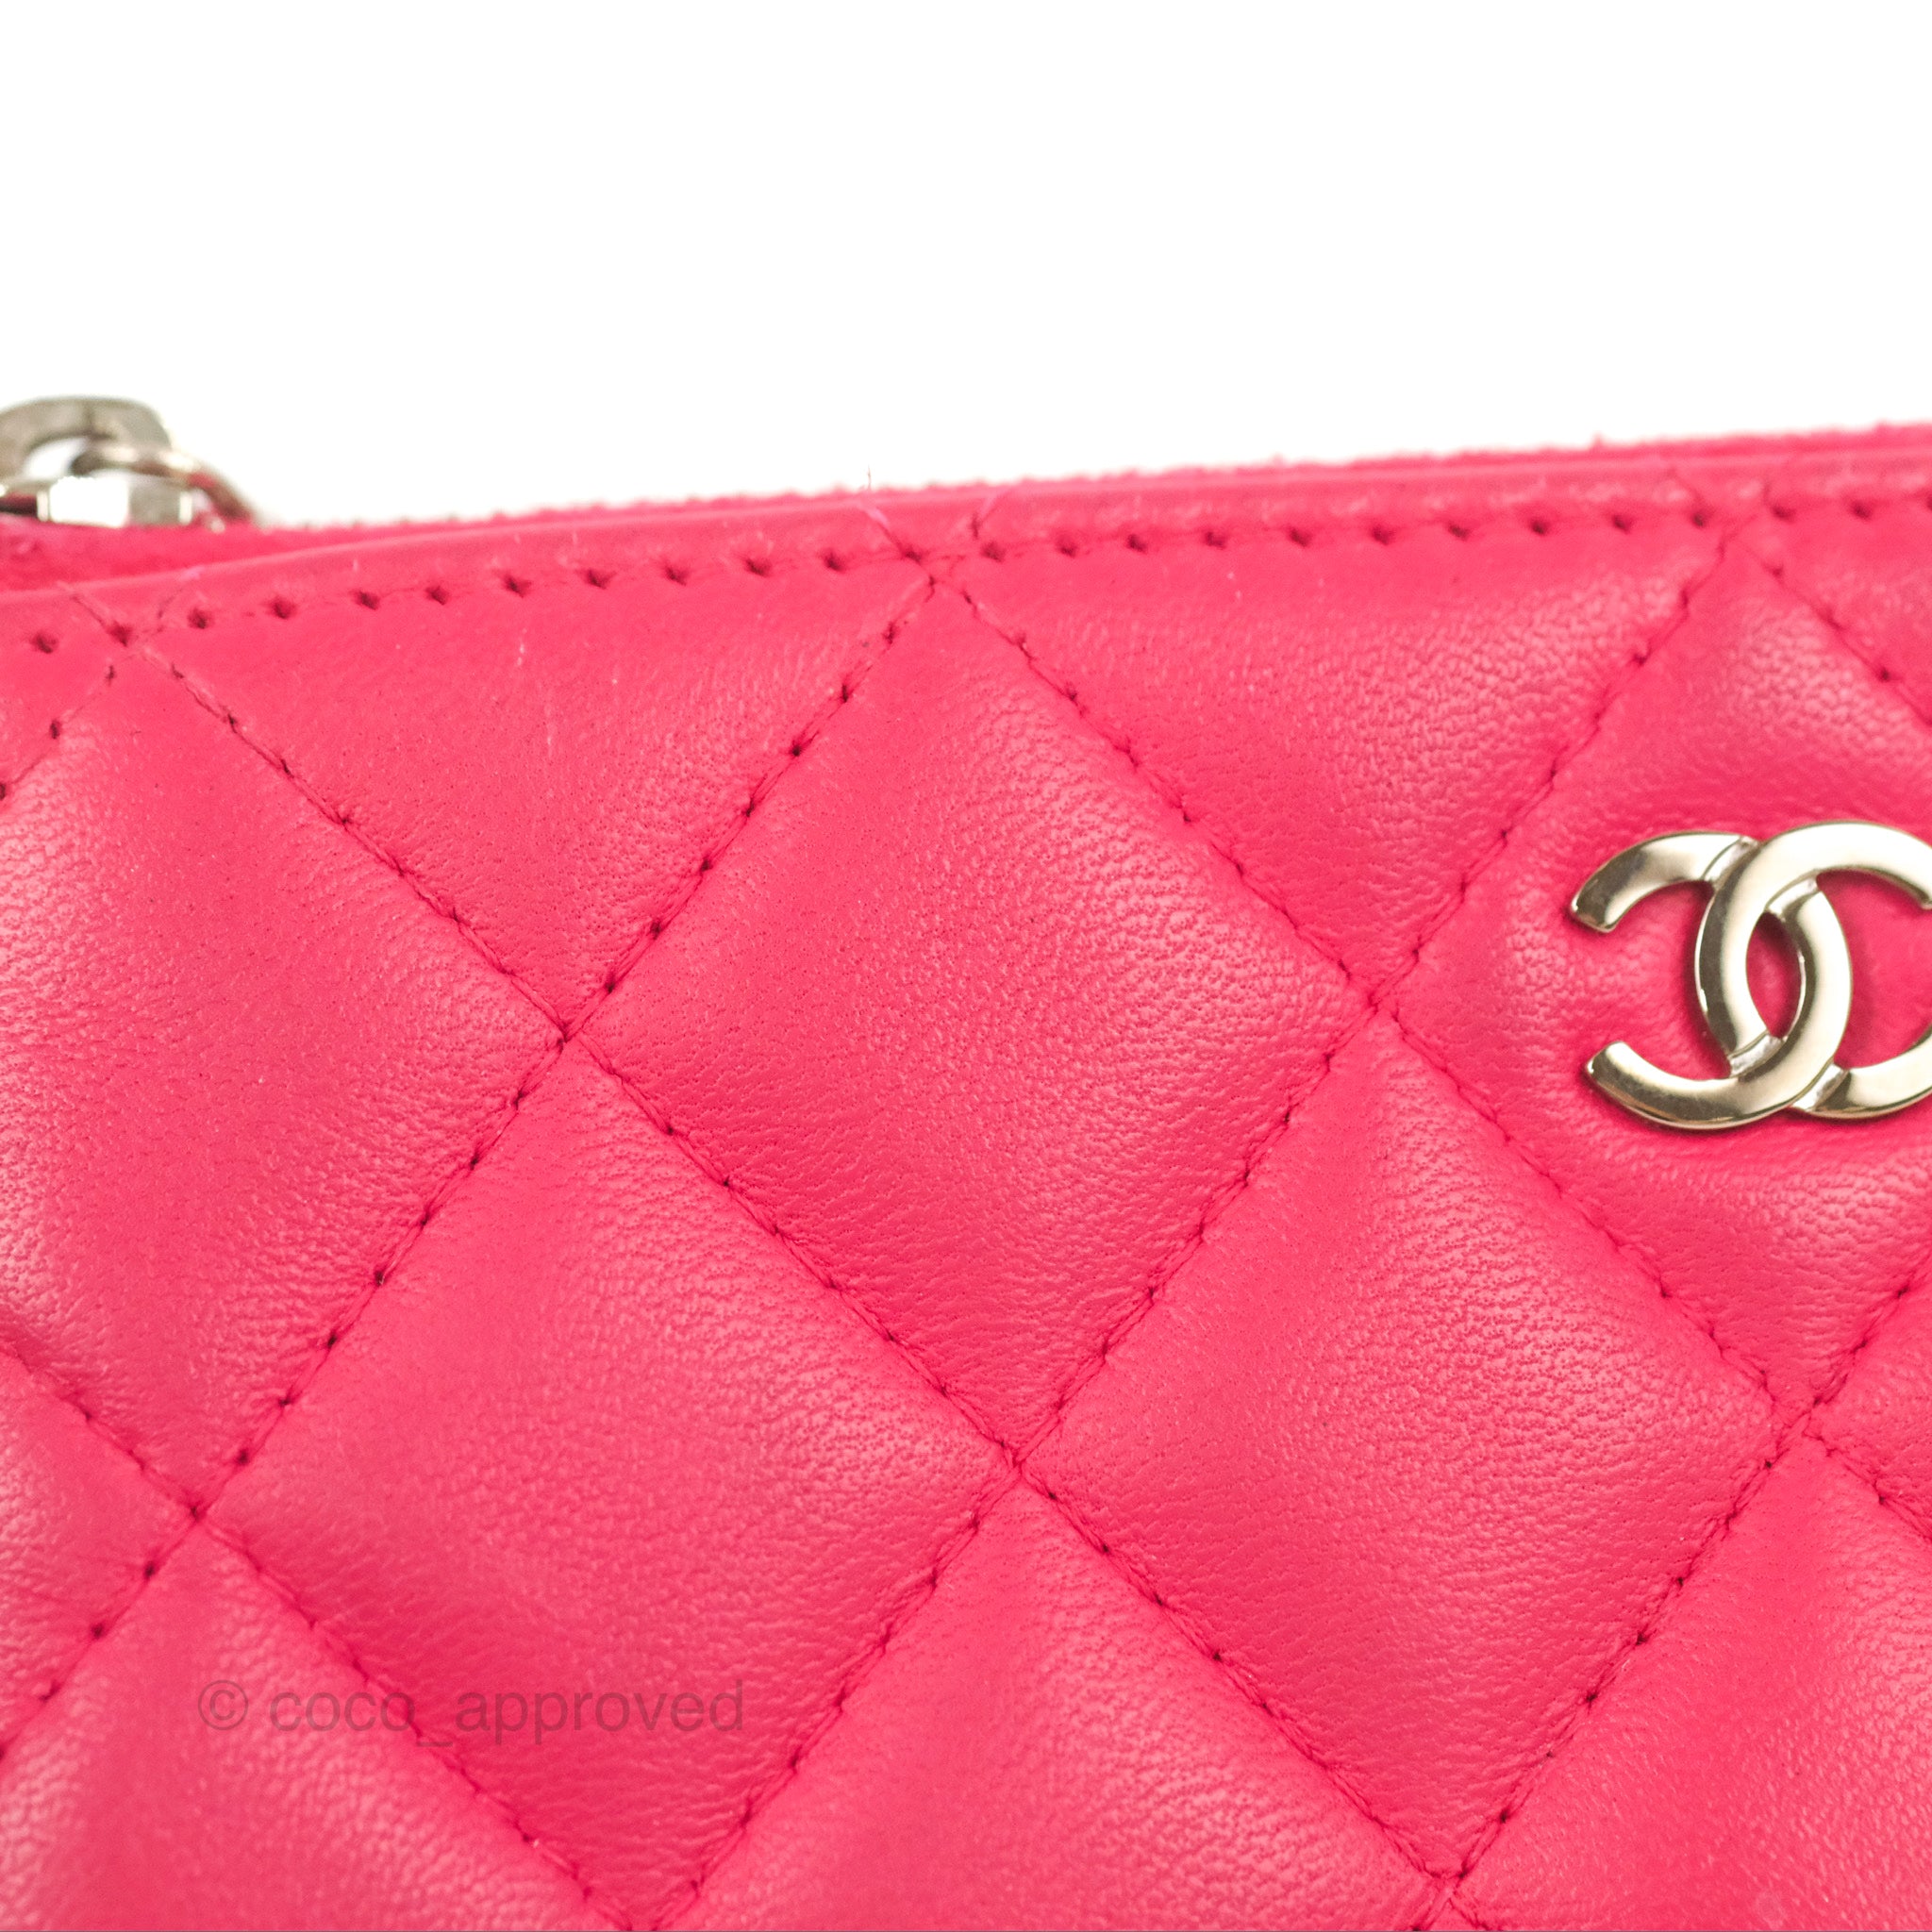 Chanel Mini O Case Zip Pouch in Hot Pink Lambskin with Silver Hardware -  SOLD